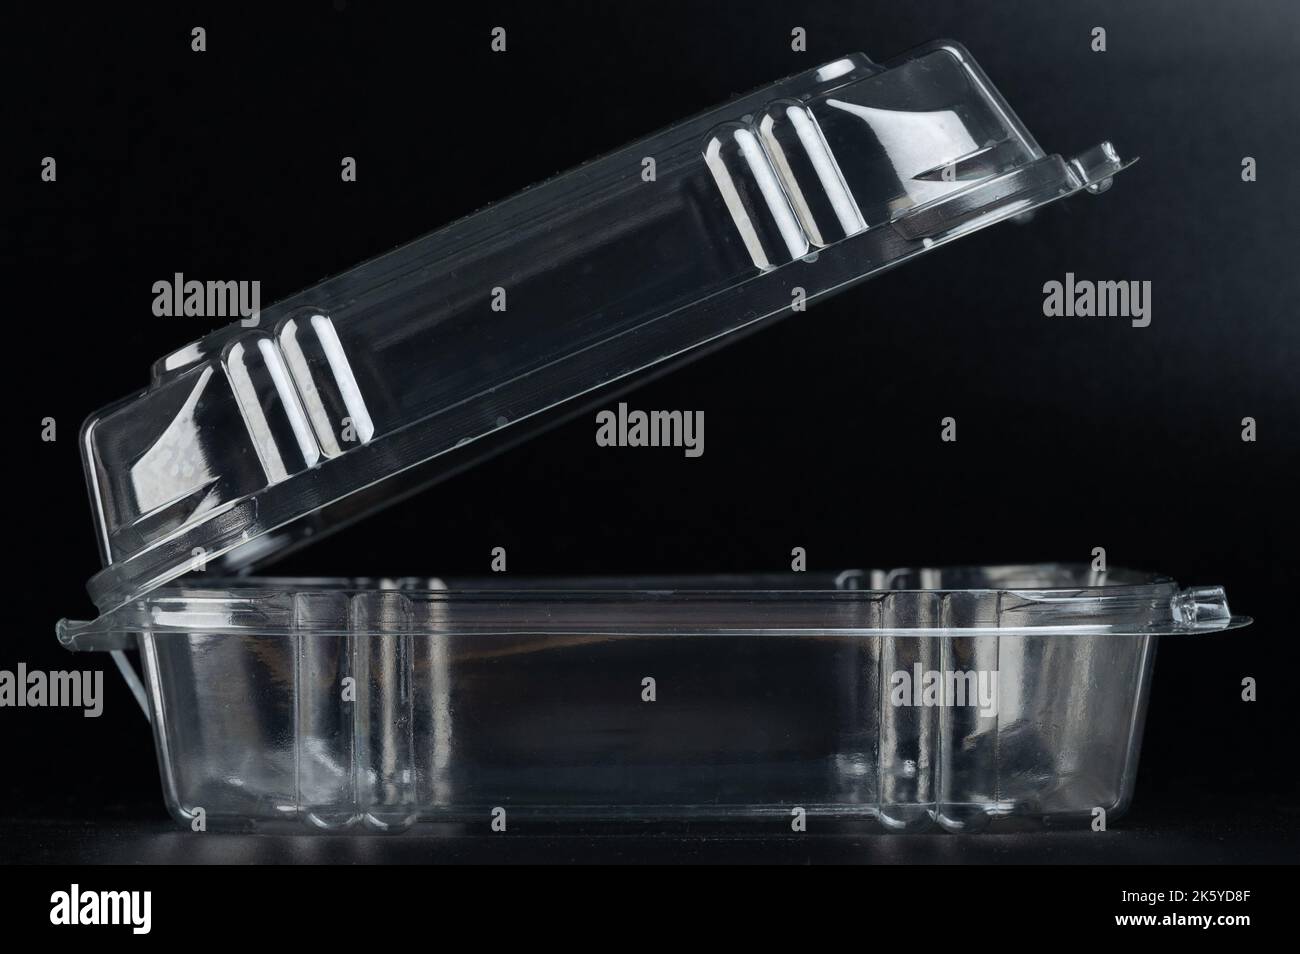 https://c8.alamy.com/comp/2K5YD8F/transparent-open-clean-empty-food-box-side-view-isolated-on-black-background-2K5YD8F.jpg